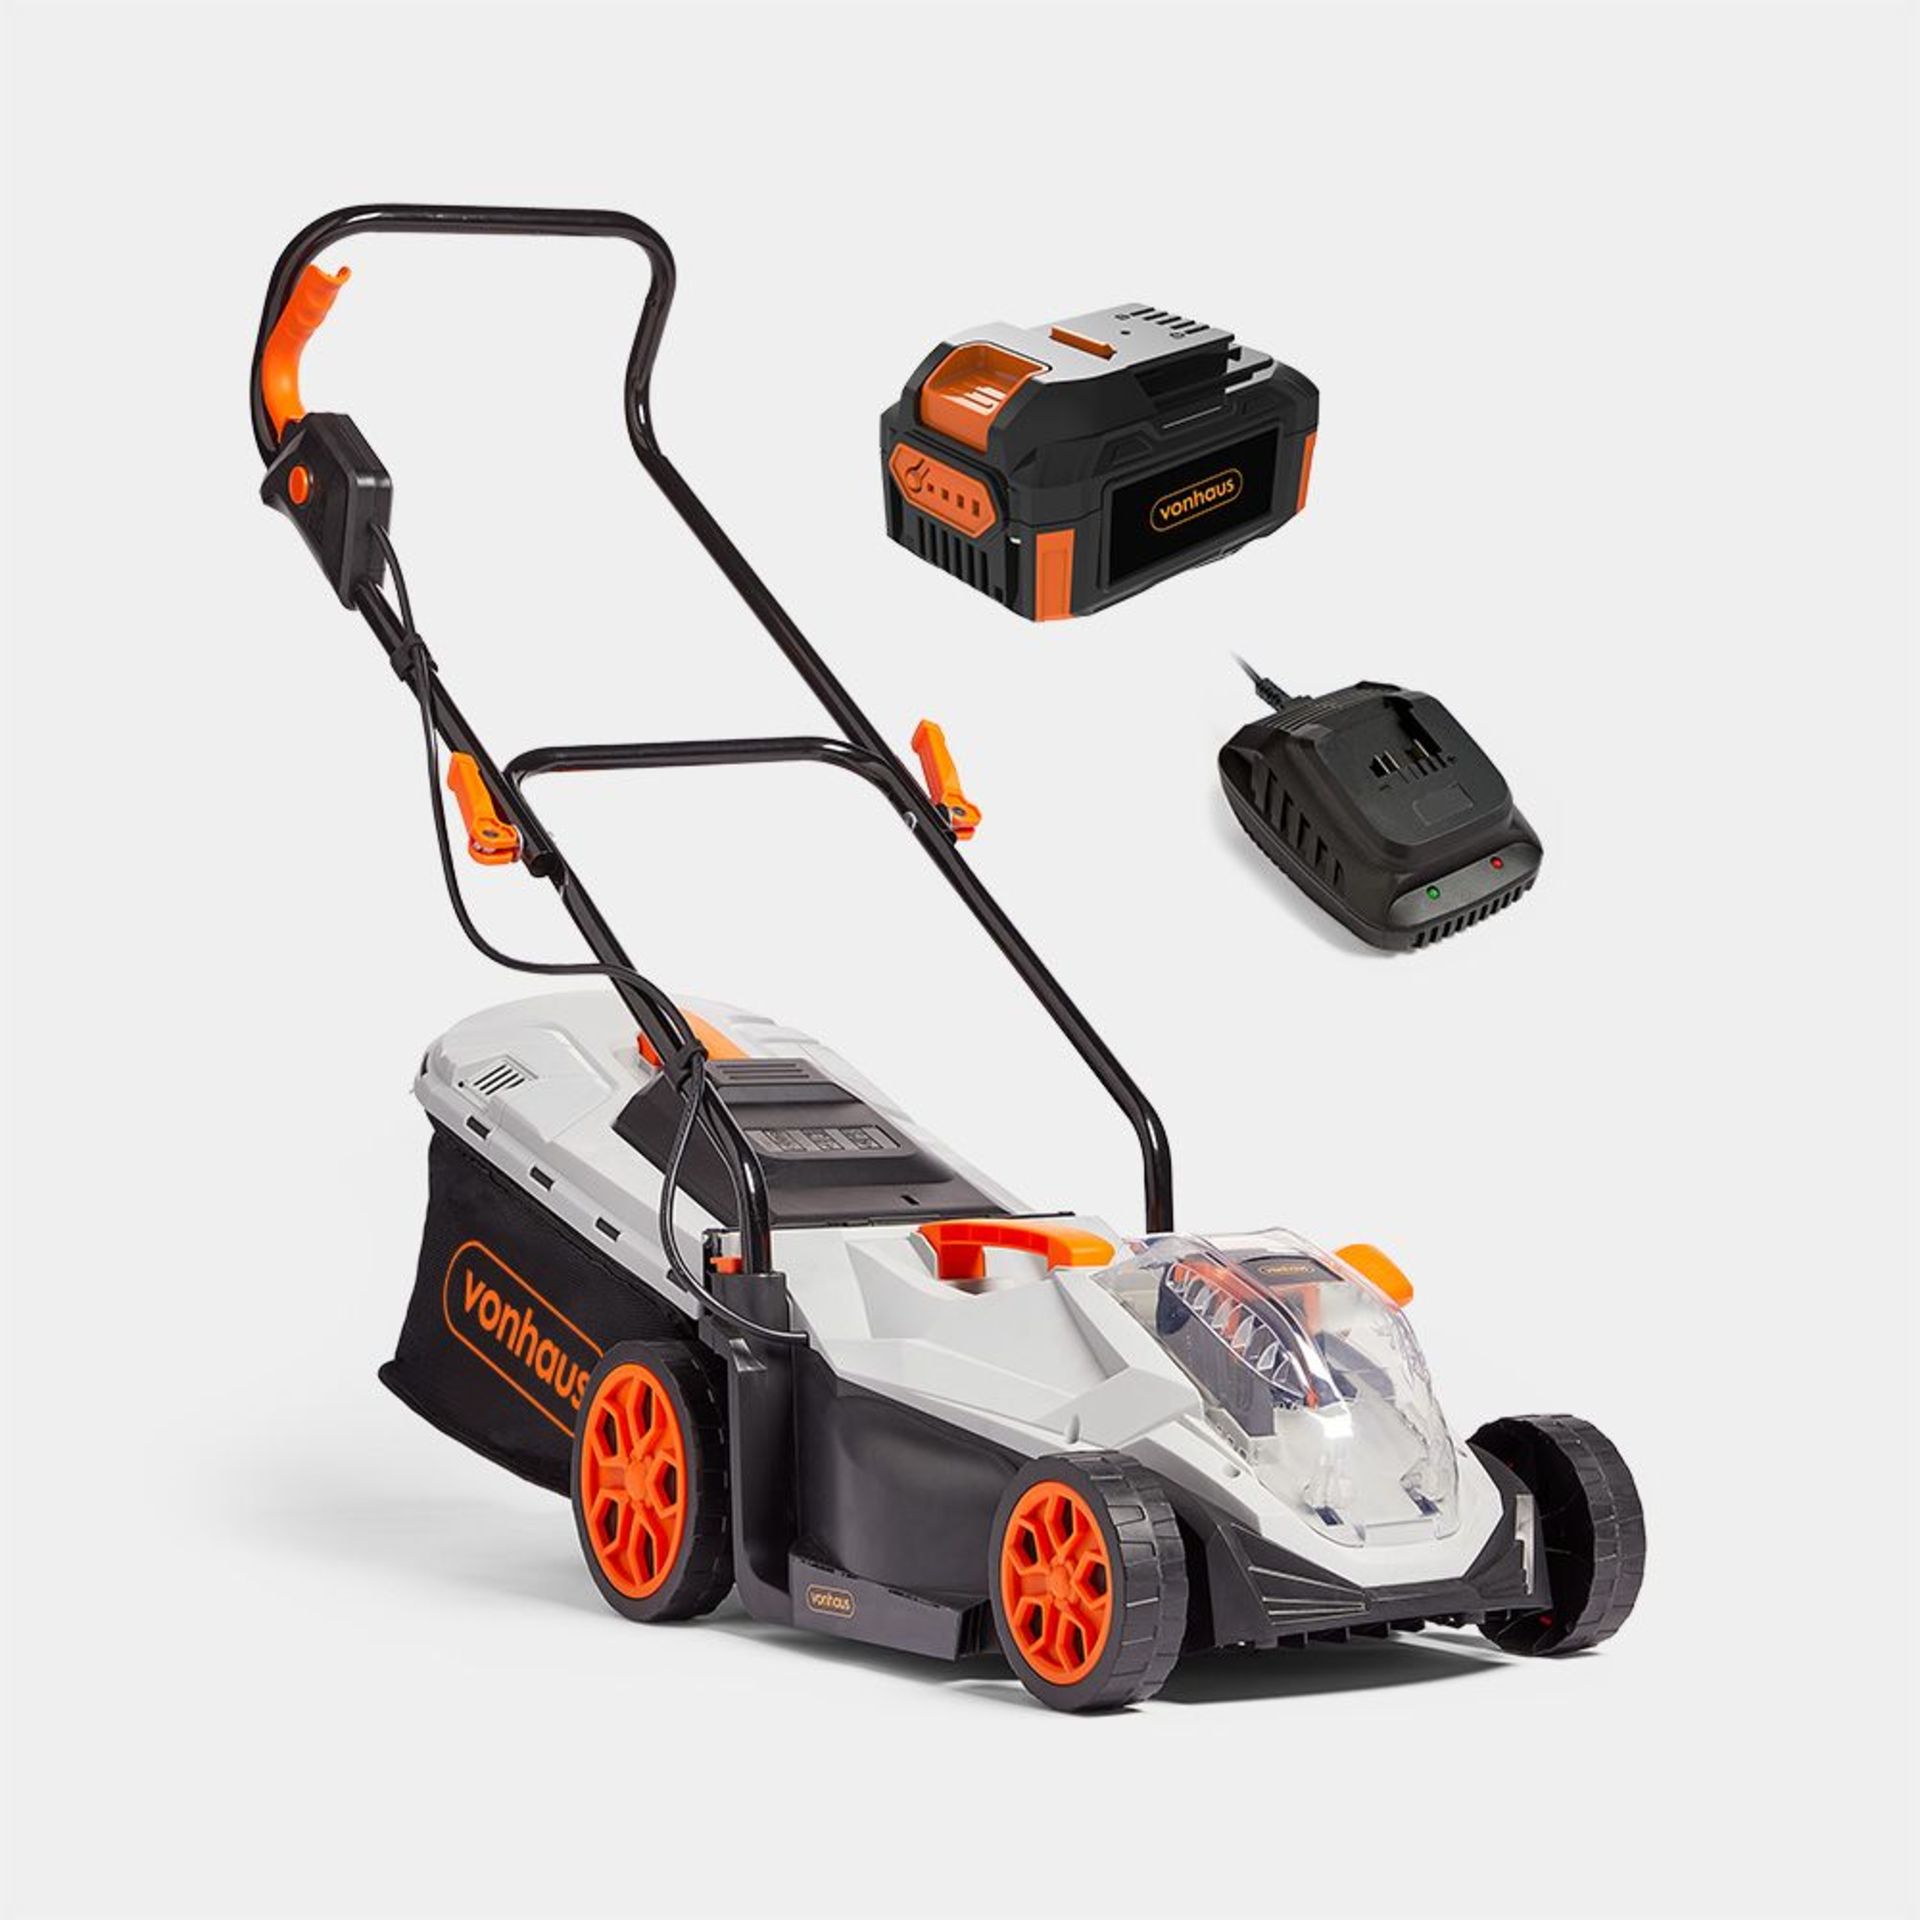 40V Cordless Lawn Mower. - S2. Work with freedom with the cordless lawn mower, featuring a